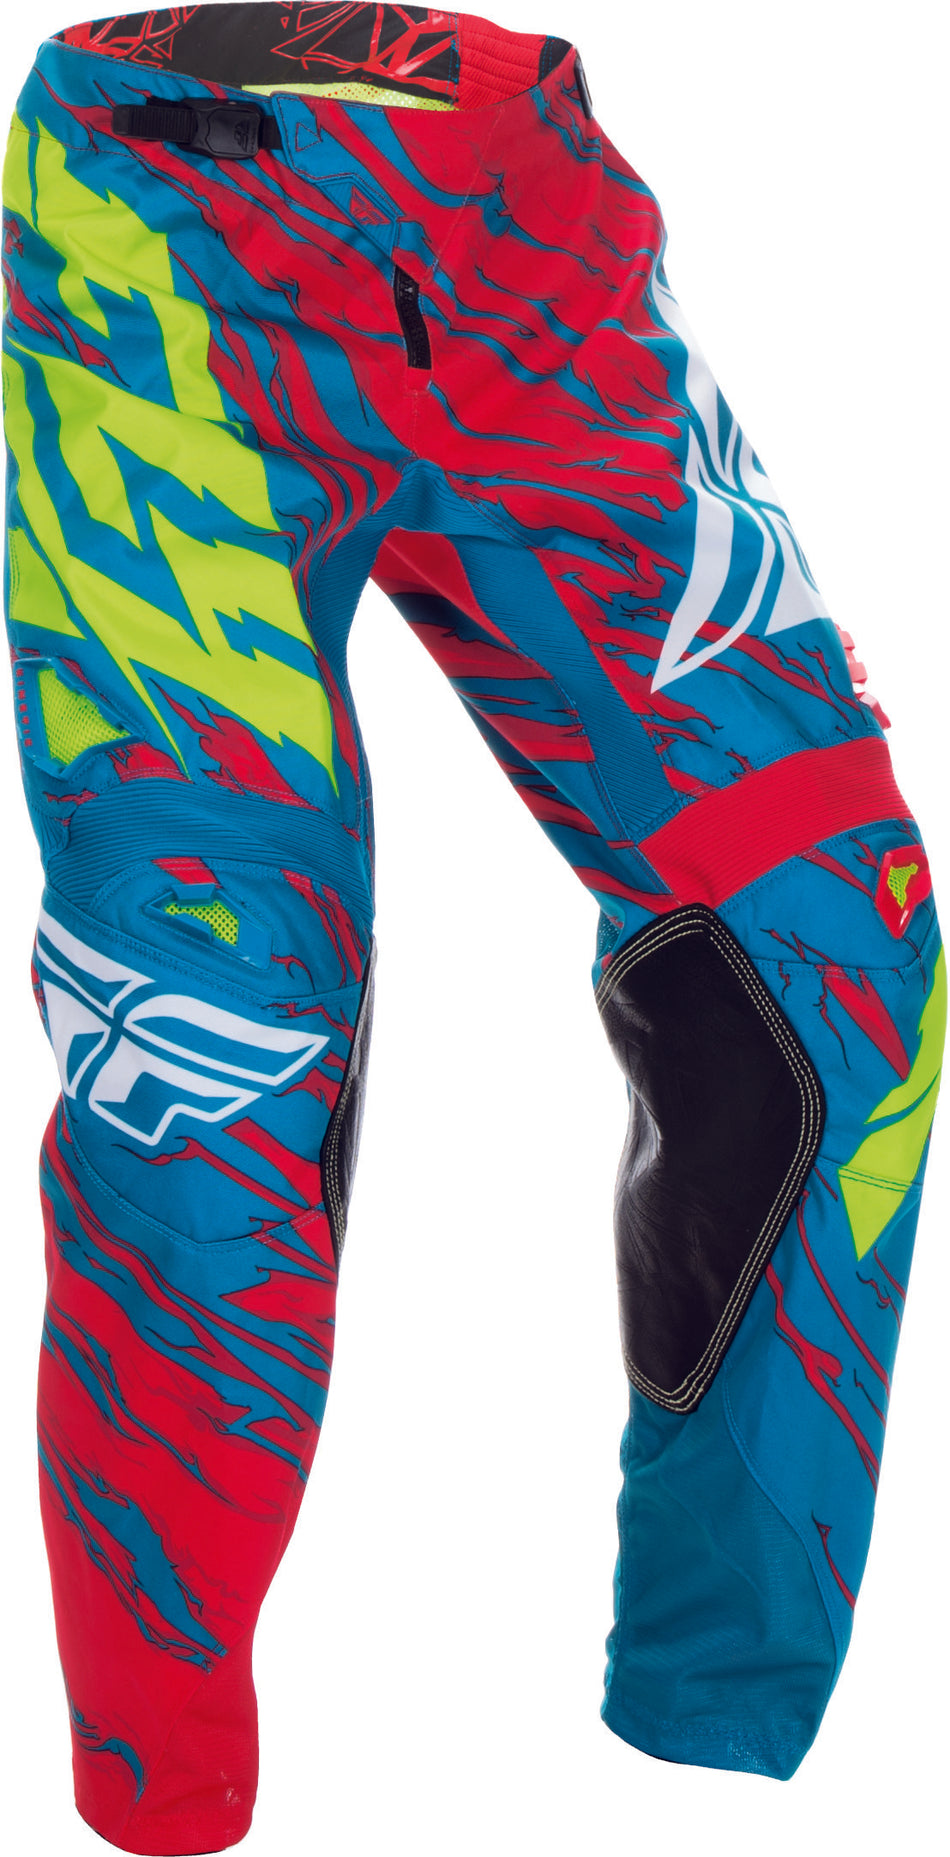 FLY RACING Kinetic Relapse Pant Teal/Red Sz 36 370-43936